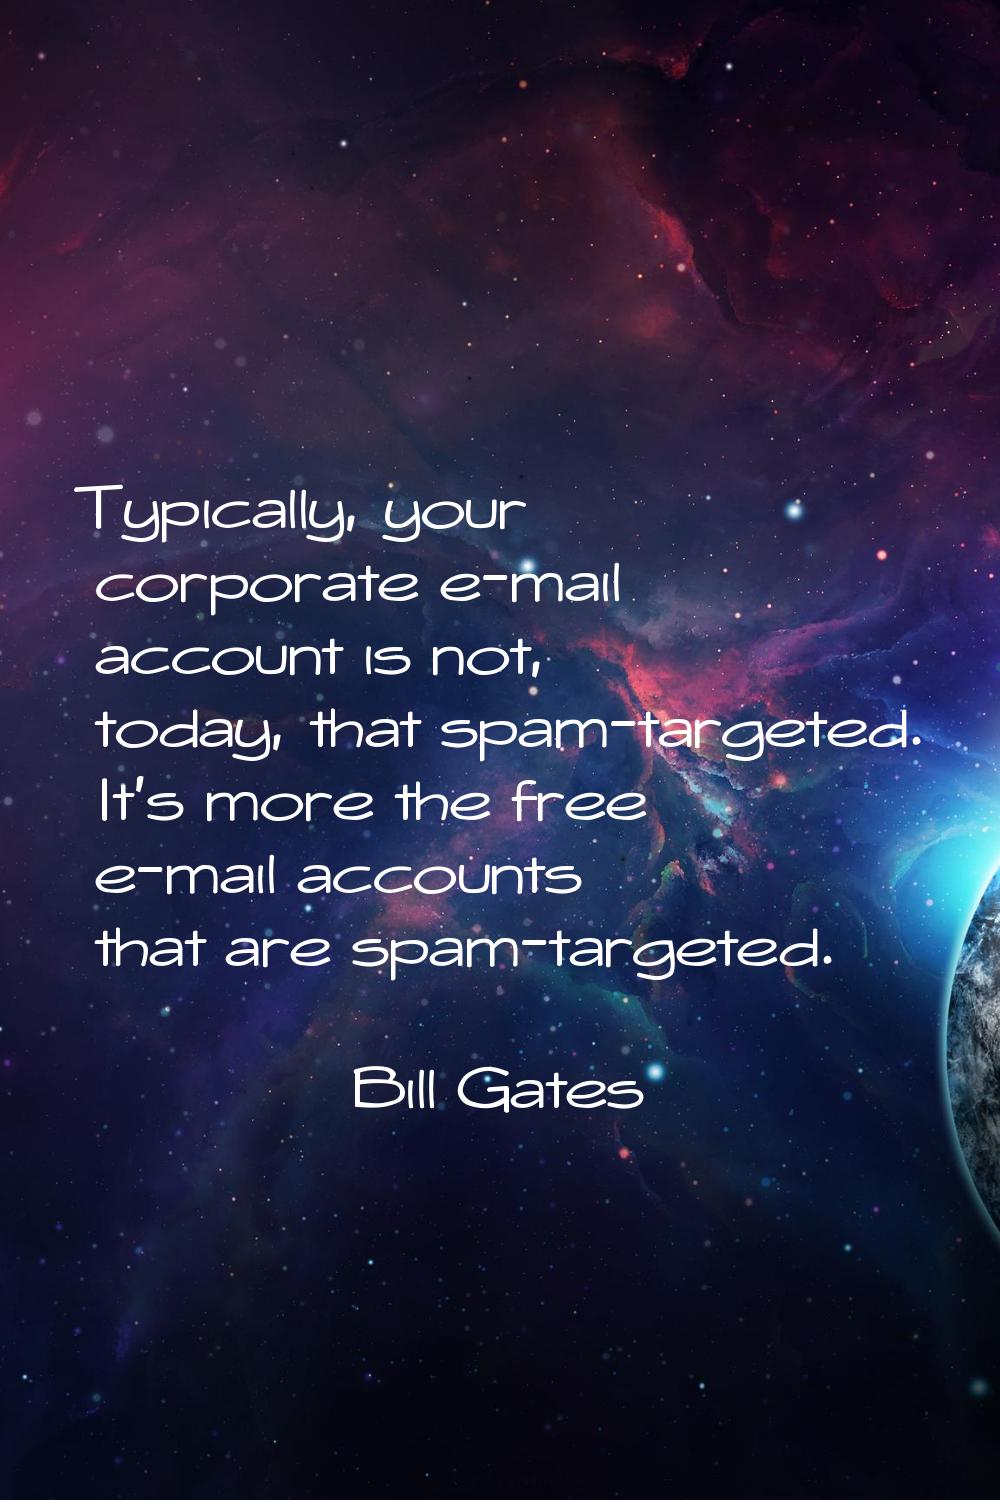 Typically, your corporate e-mail account is not, today, that spam-targeted. It's more the free e-ma